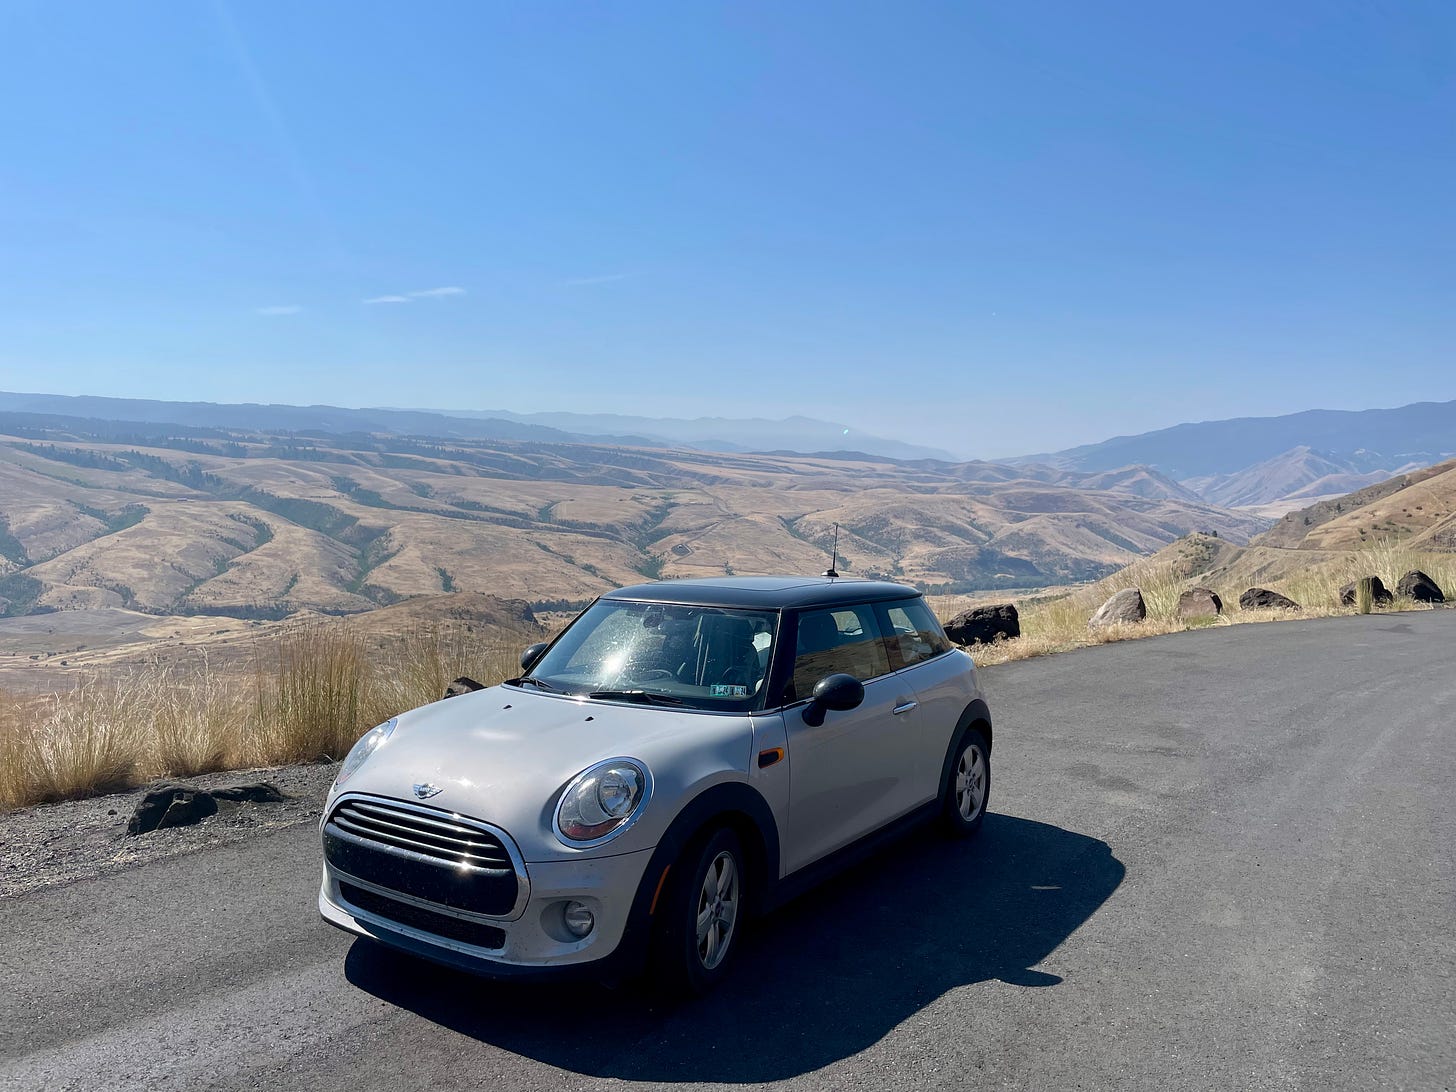 Photograph of a silver MINI Cooper against a backdrop of rolling desert hills.